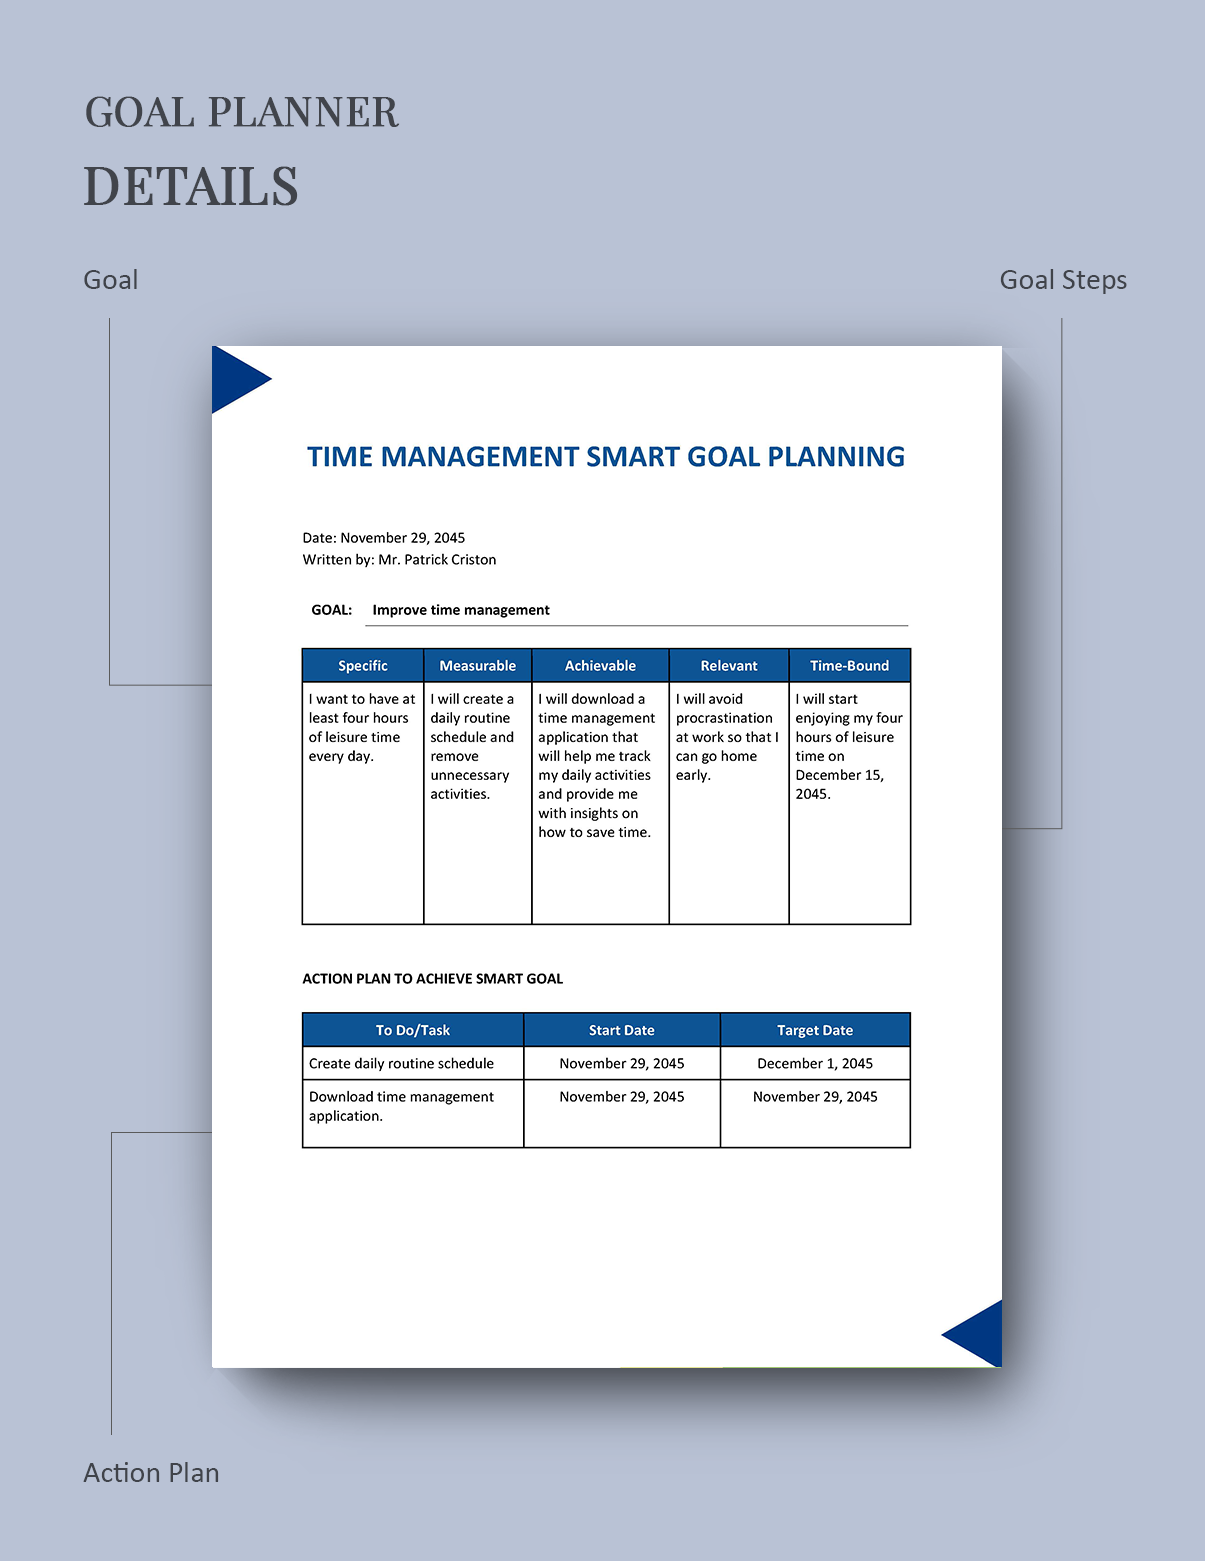 Time Management Smart Goals Template for Students